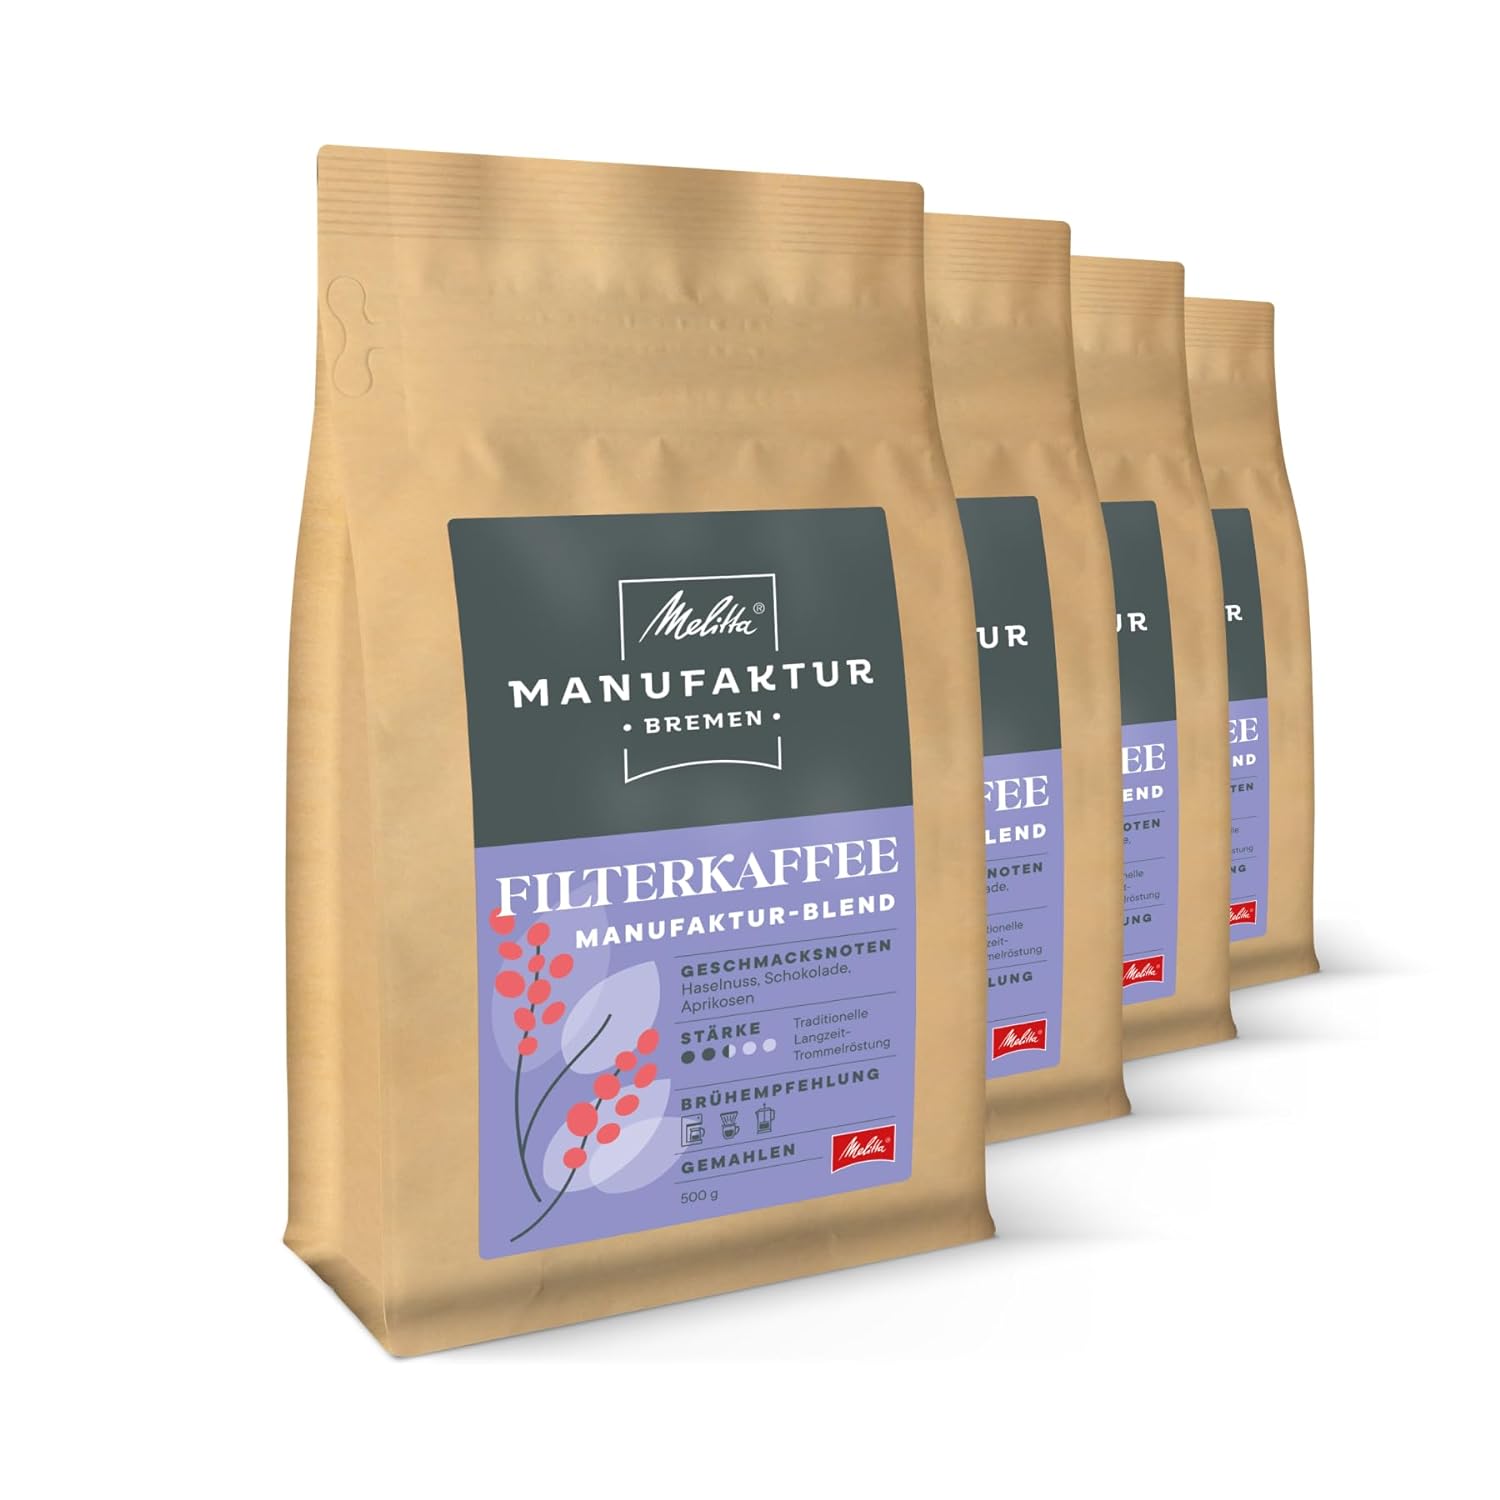 Melitta Manufaktur-Kaffee Filter Coffee Specialty Coffee, 4 x 500 g, Ground, Farm and Region Coffee from Brazil and Nicaragua, Roasted in Germany, Thickness 2.5 in Tray